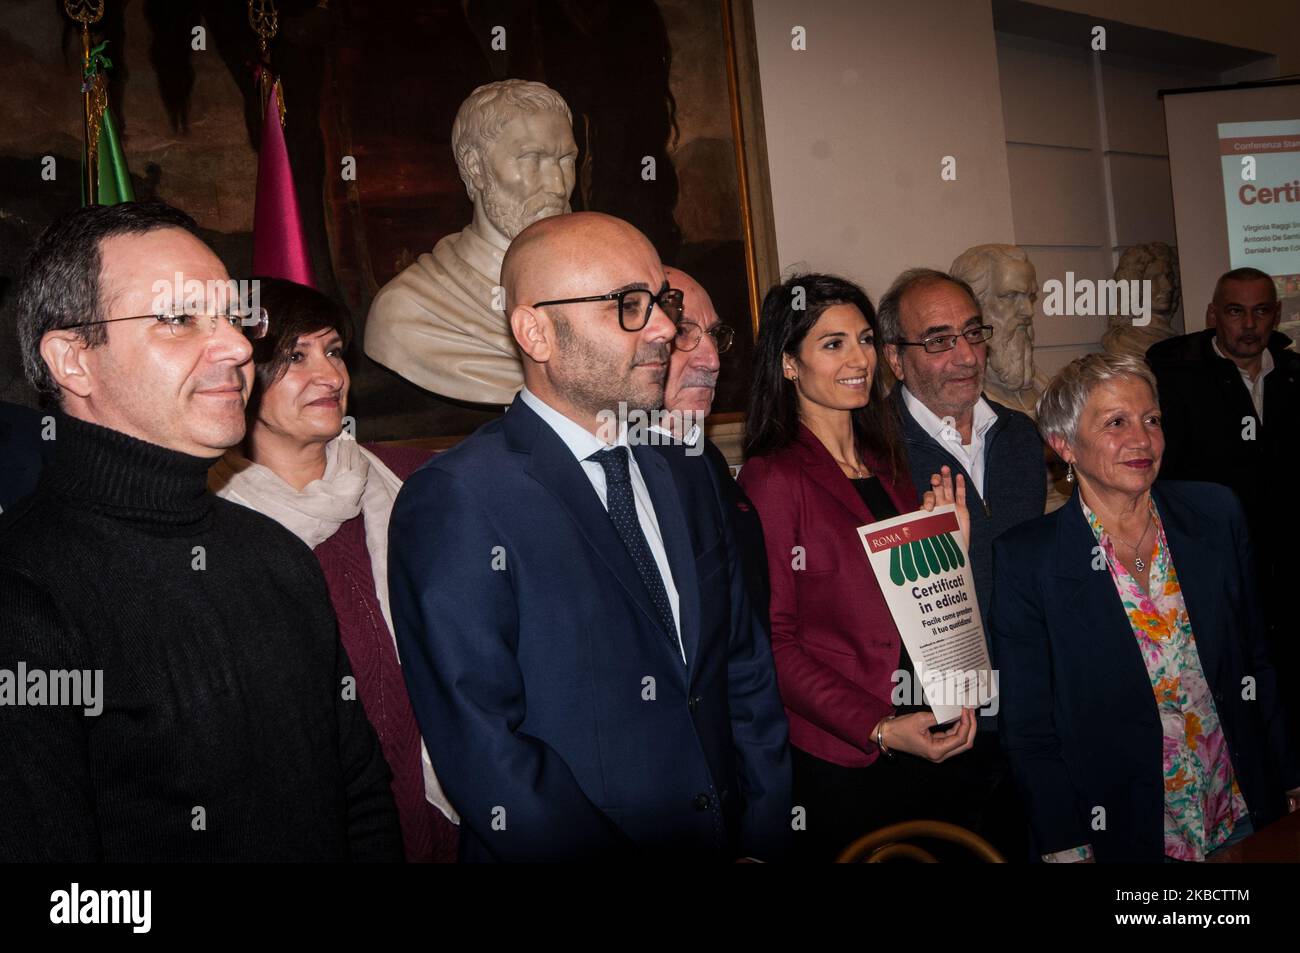 Mayor of Rome Virginia Raggi and the Councillor for Personnel, Registry and Civil Status, Demographic and Electoral Services Antonio De Santis present to the press the initiative ''Certificates on newsstands'', in Rome, Italy, on December 13, 2019. (Photo by Andrea Ronchini/NurPhoto) Stock Photo